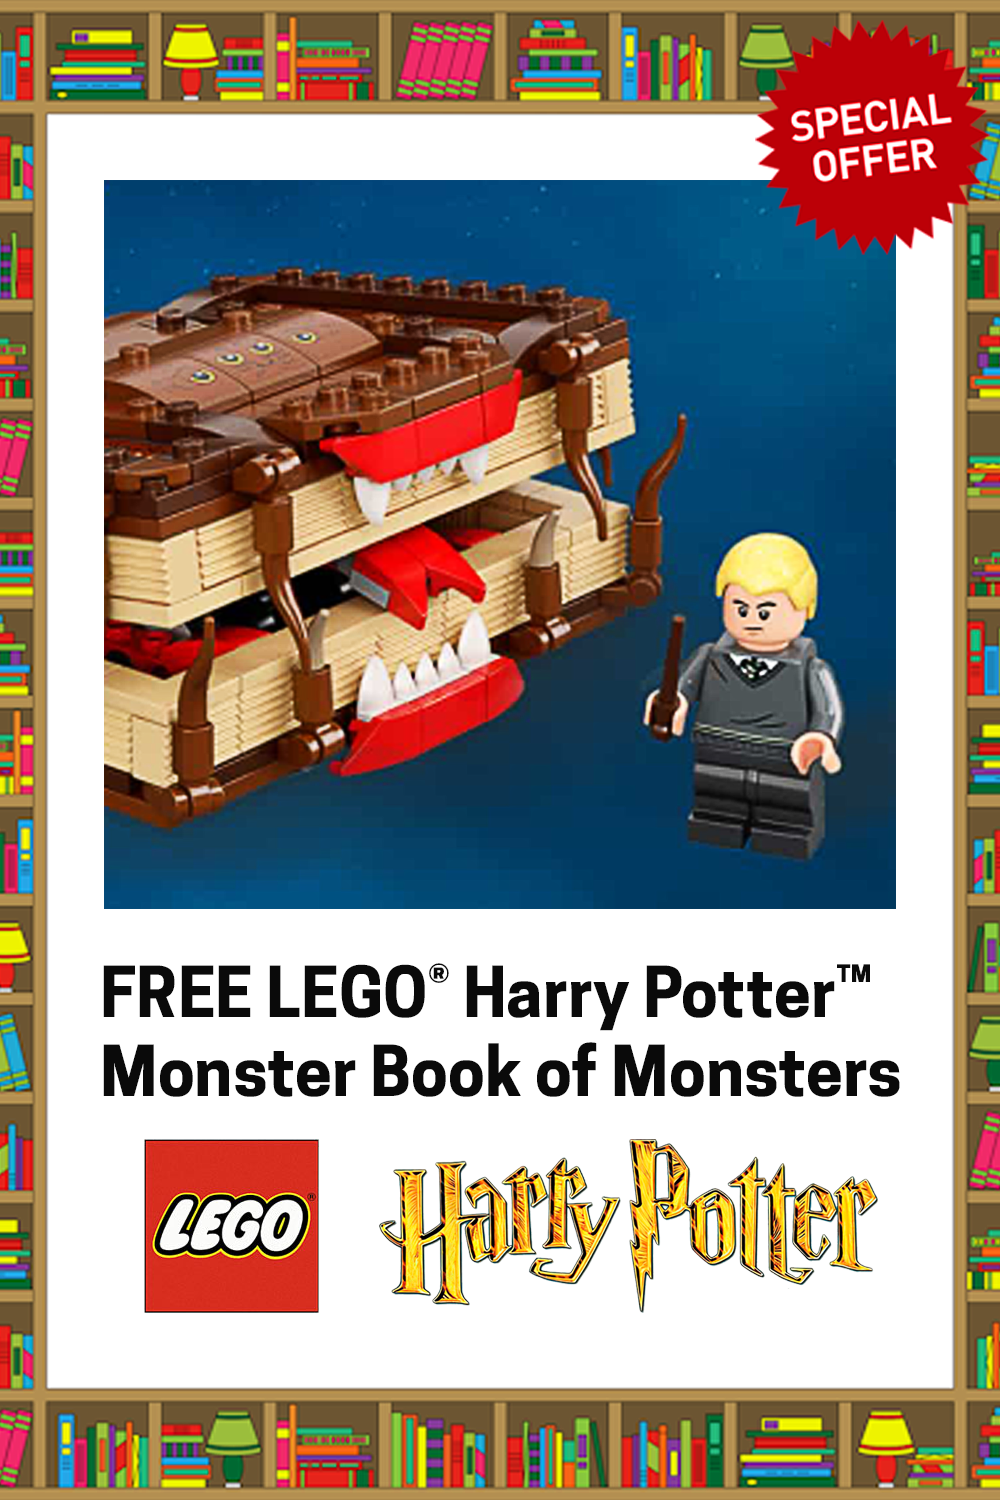 FREE LEGO® Harry Potter™ Monster Book of Monsters